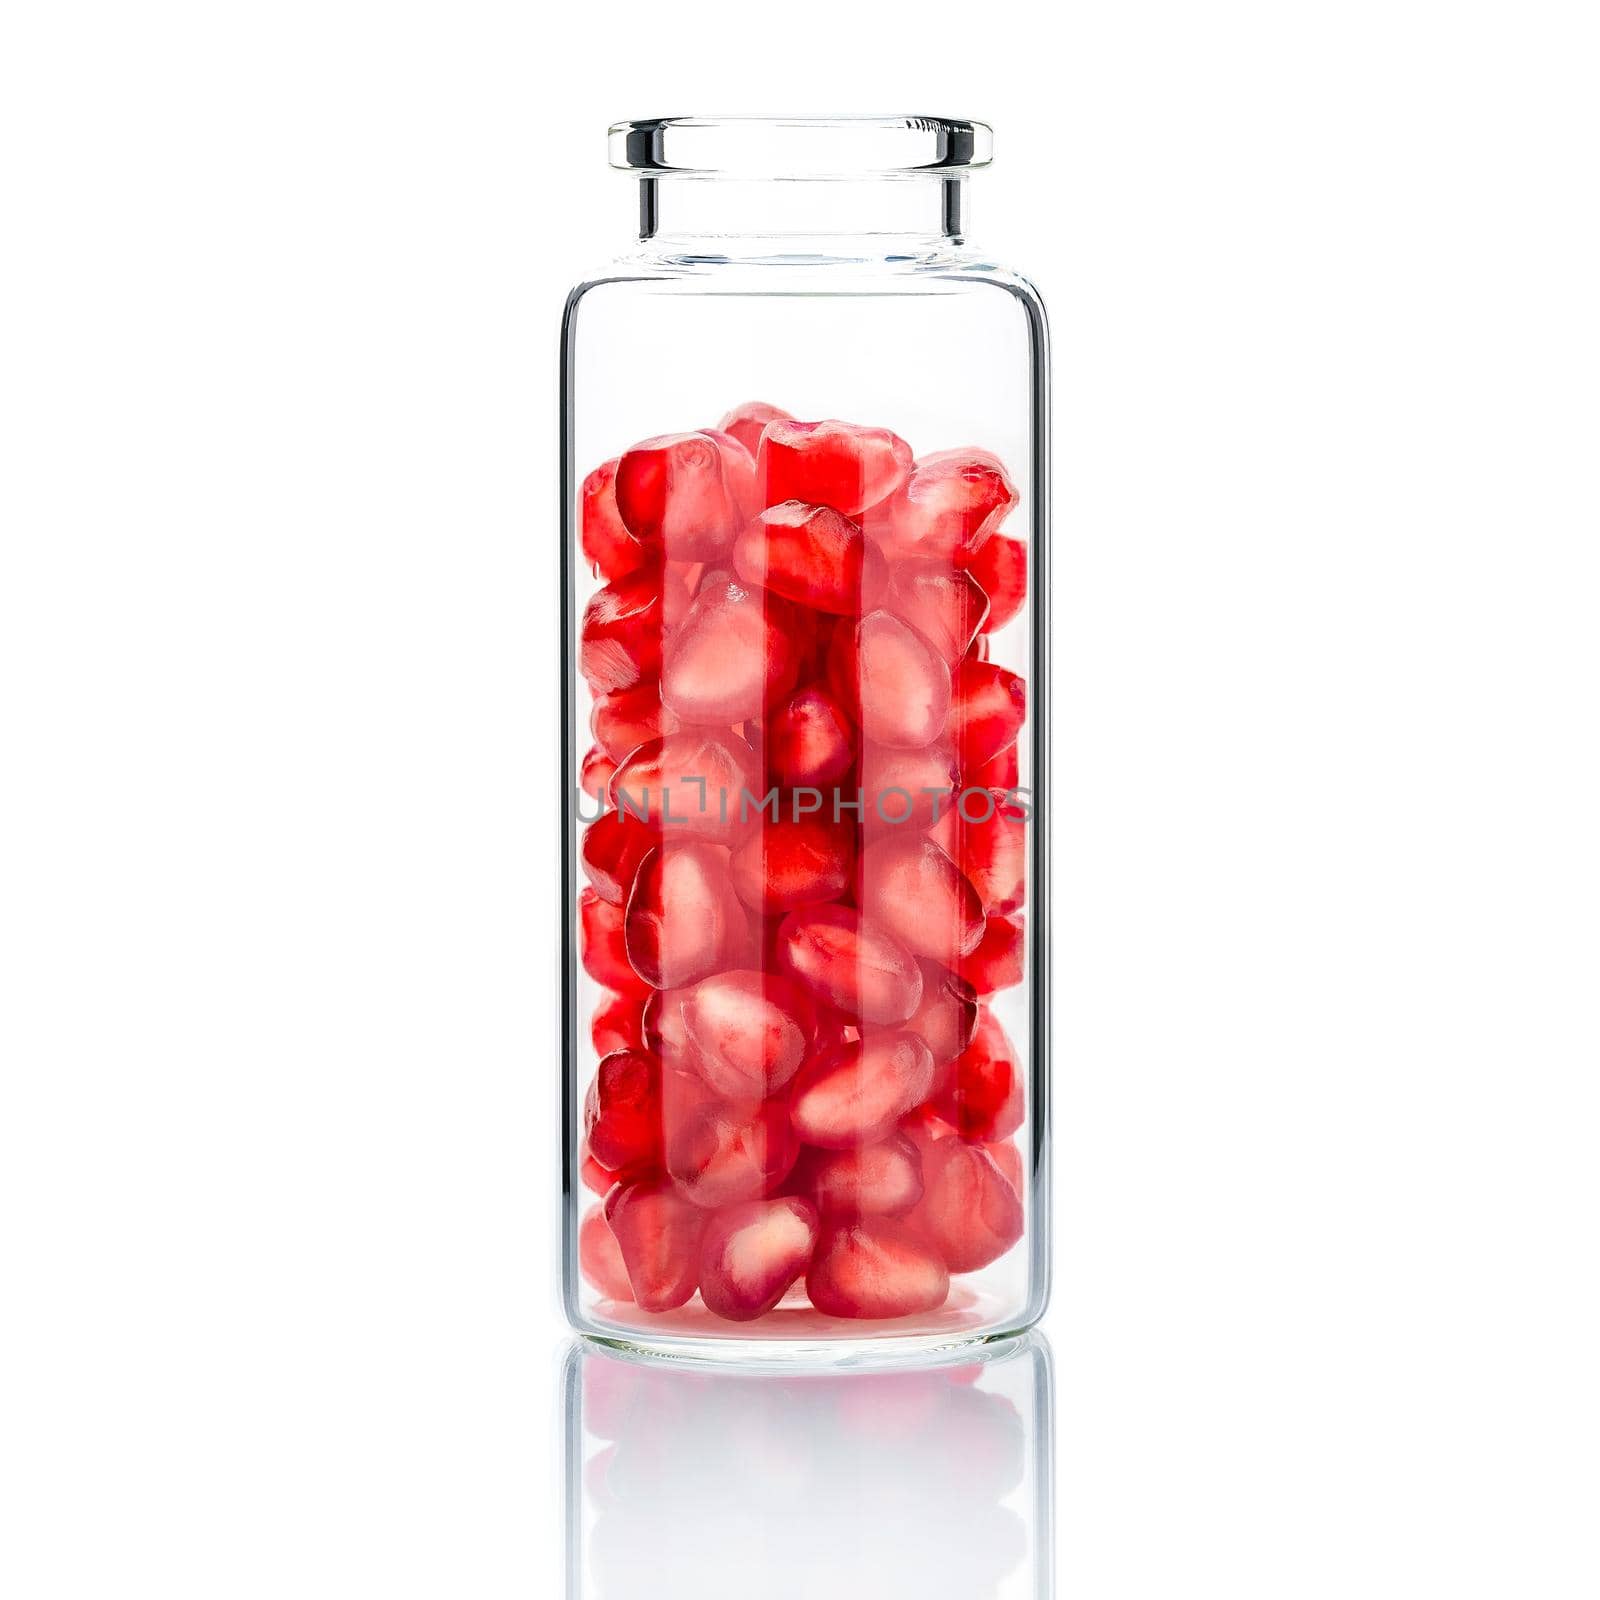  Homemade skin care with pomegranate seeds in a glass bottle  isolate on white background. by kerdkanno